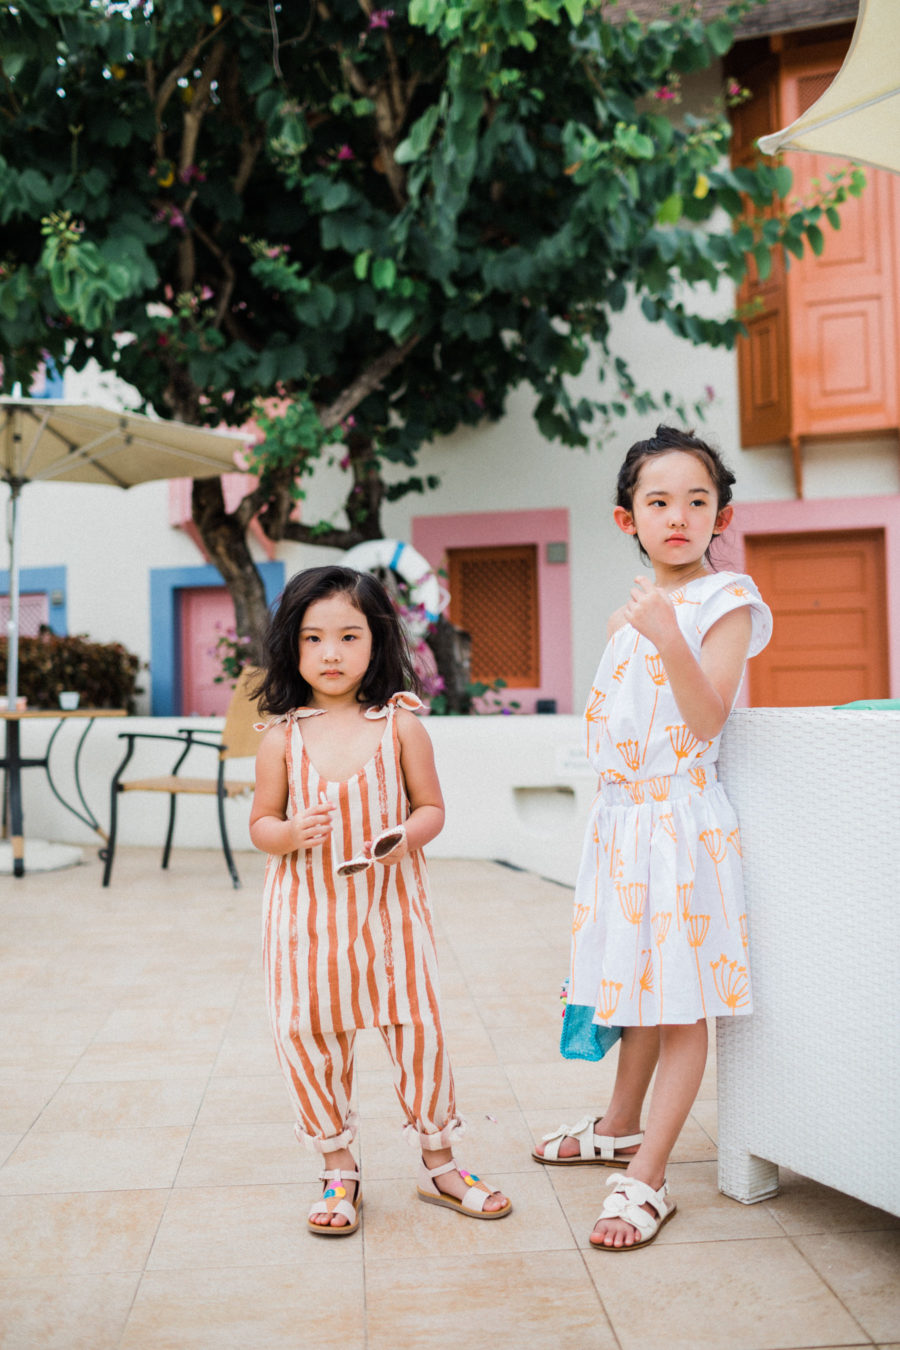 Cute Vacation Outfits for Little Girls, Melijoe kids fashion, fashion blogger family, fashion blogger kids, kids beach style, melijoe kids style, cute swimsuits for kids // Notjessfashion.com